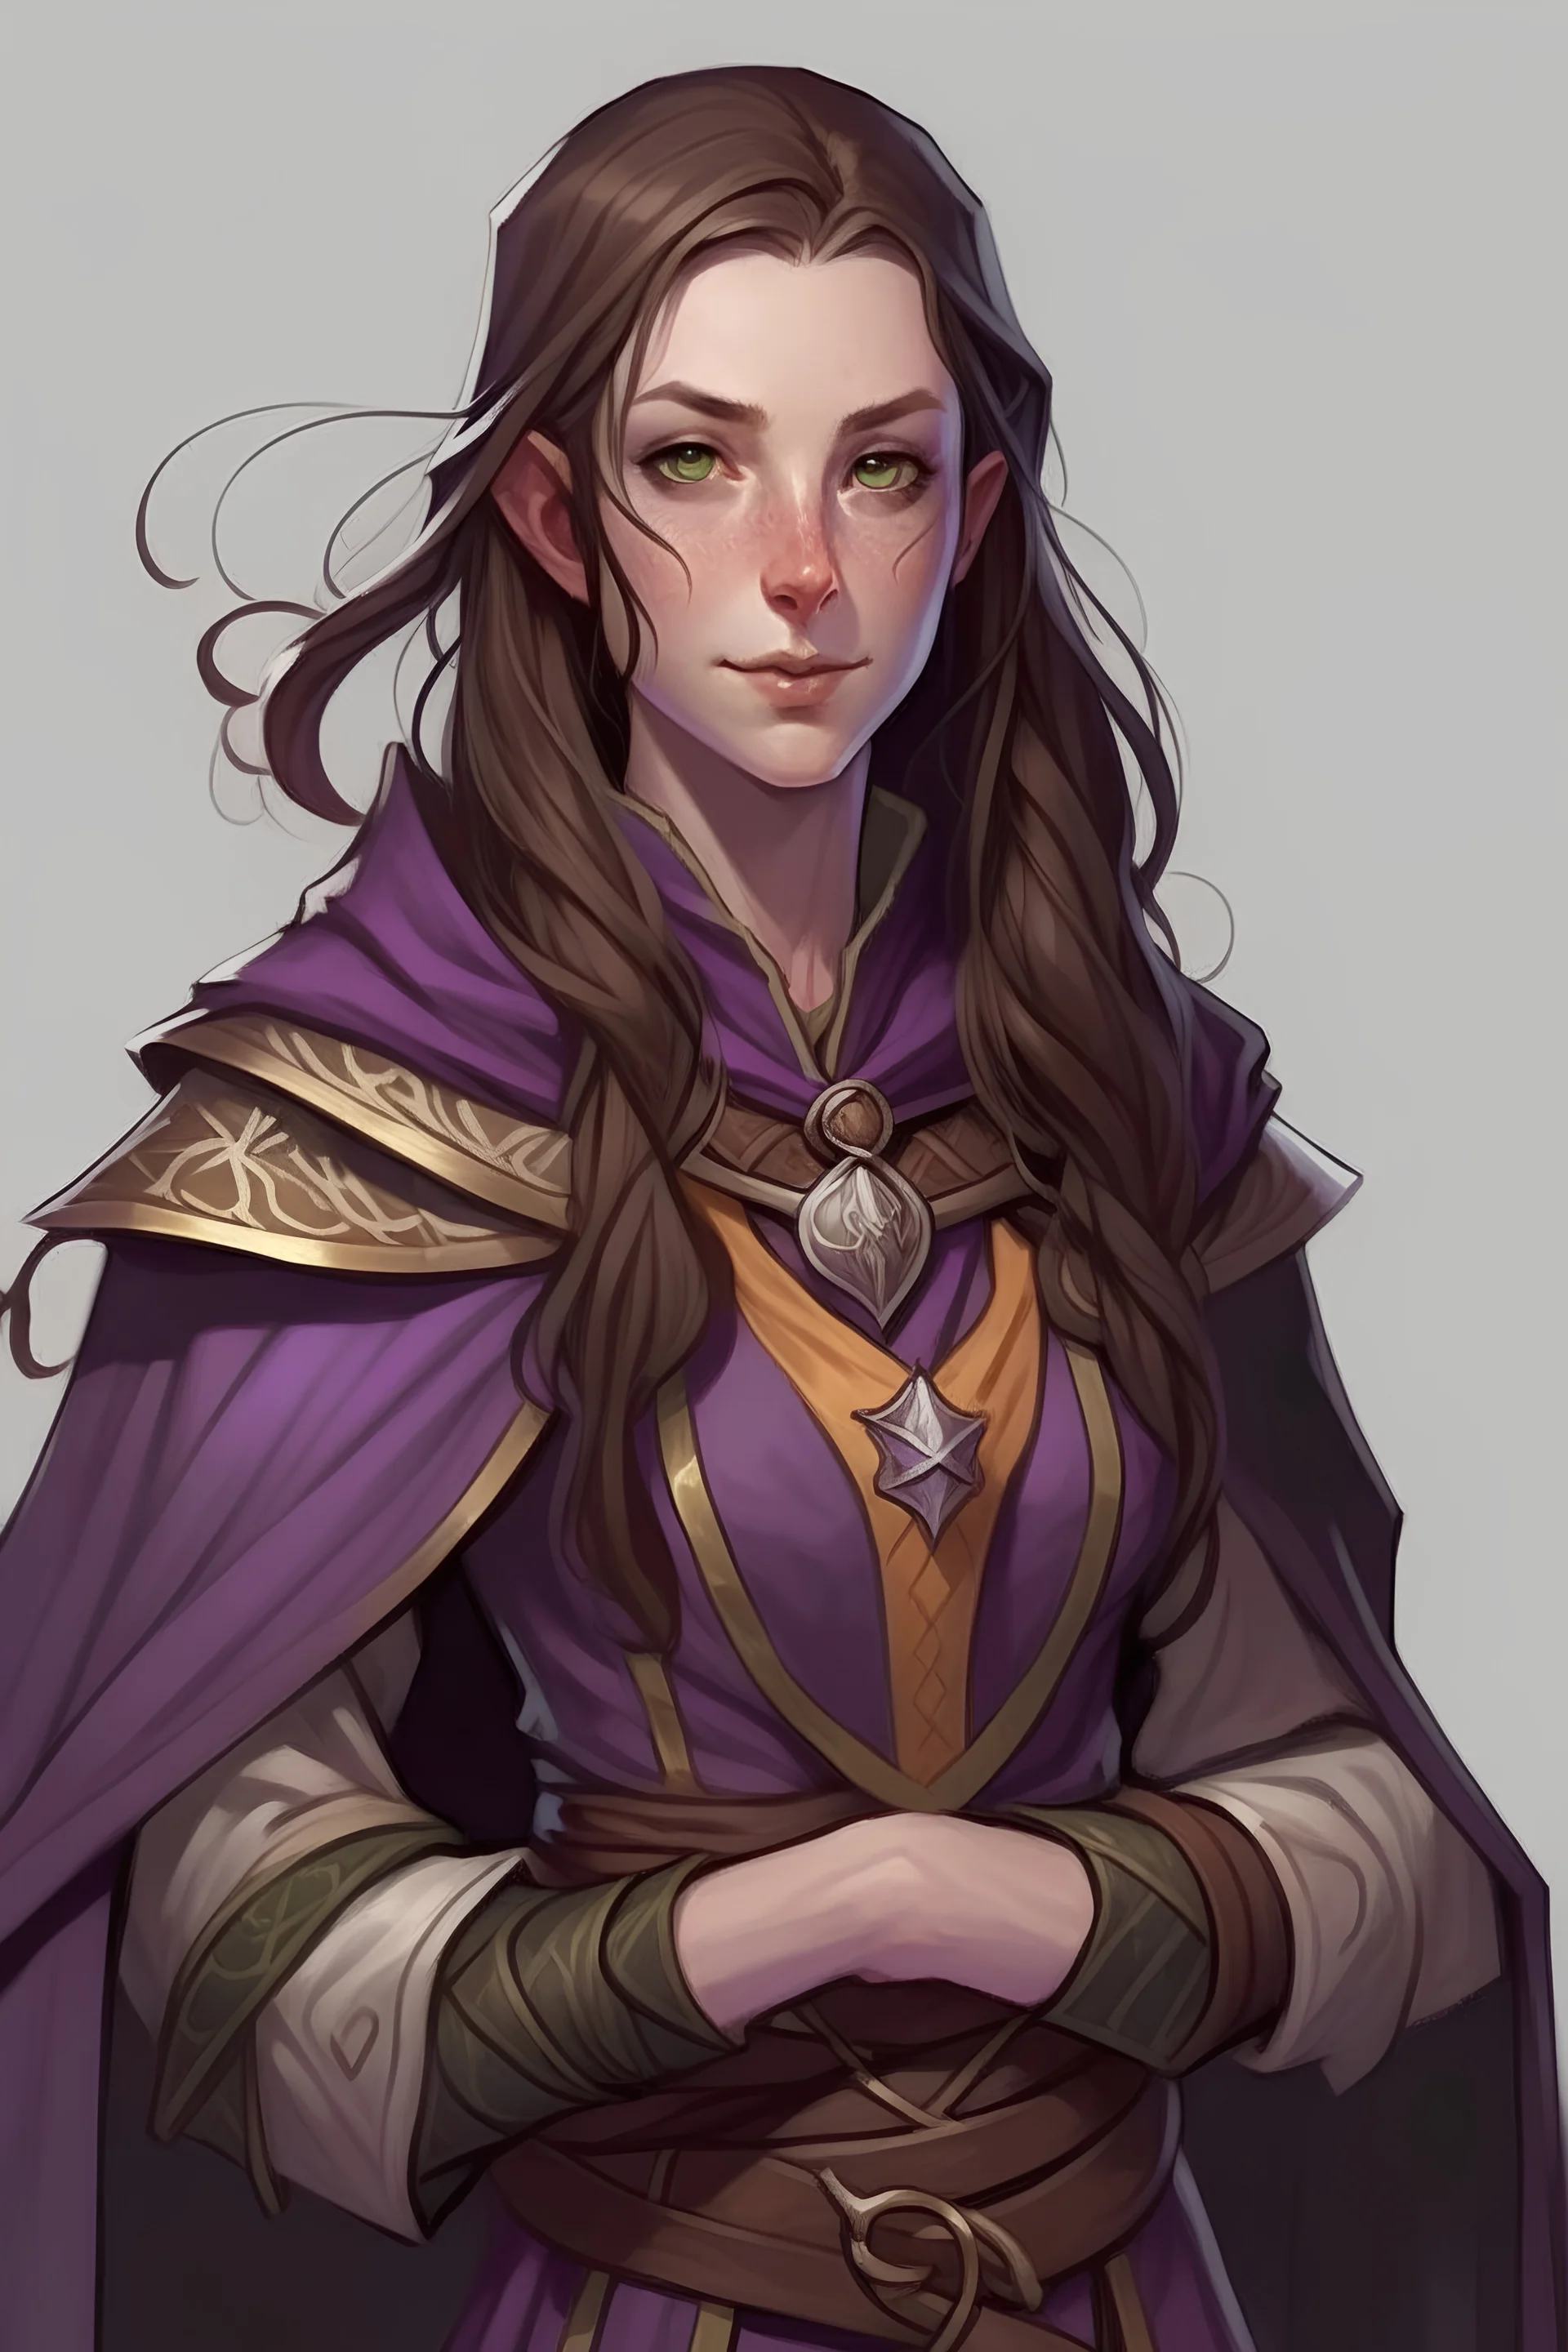 cahotic neutral charismatic Wood Elf Bard Female with pale skin and sharp features, long brown hair, wearing a purple vest and brown adventurer's cloak with a smirk.